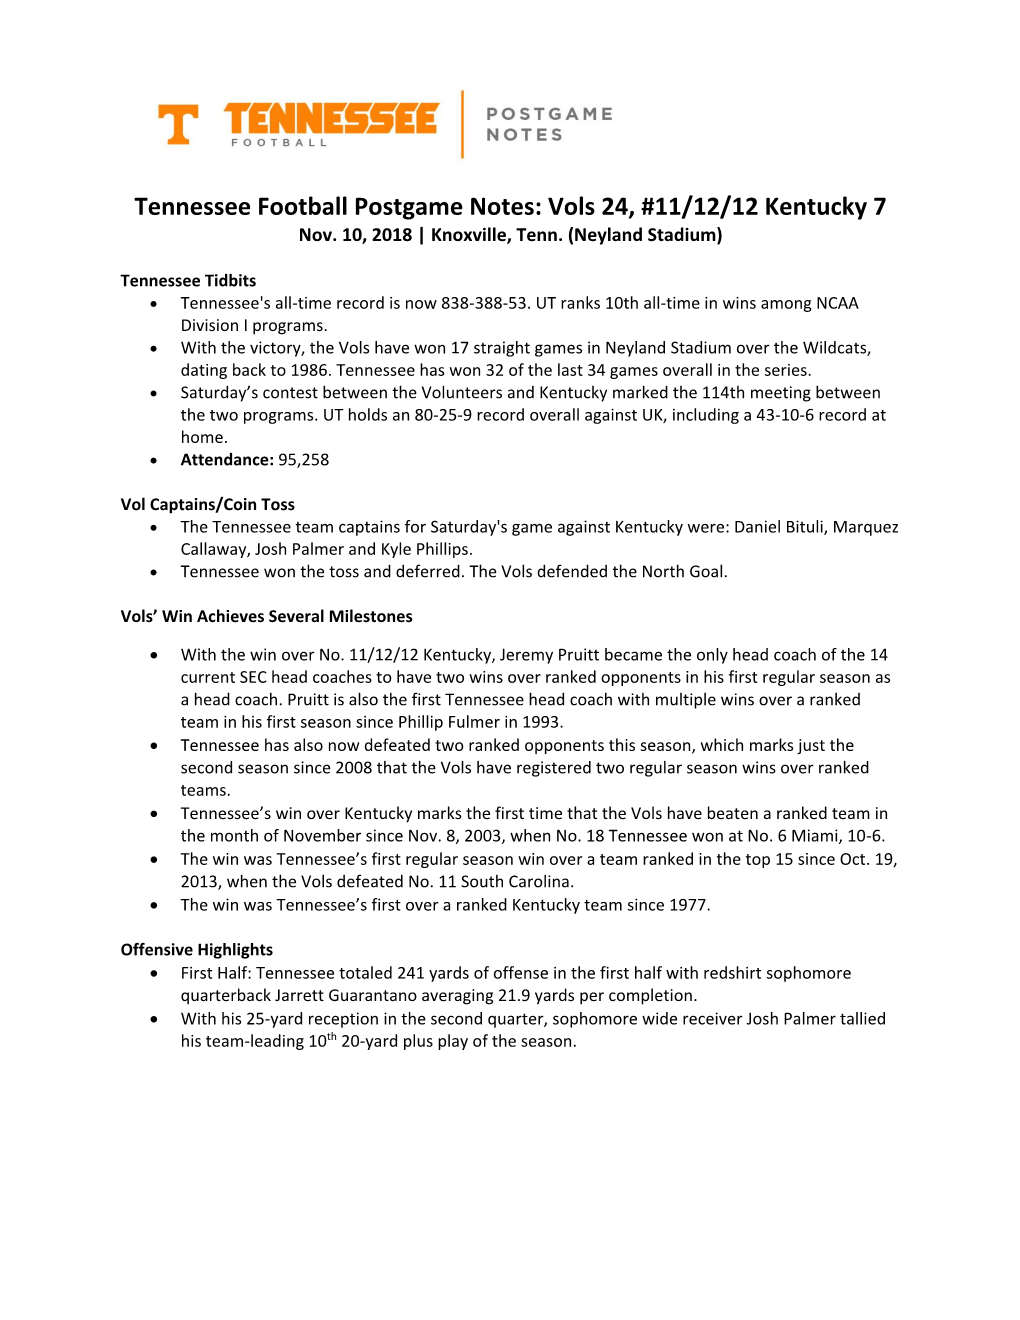 Tennessee Football Postgame Notes: Vols 24, #11/12/12 Kentucky 7 Nov